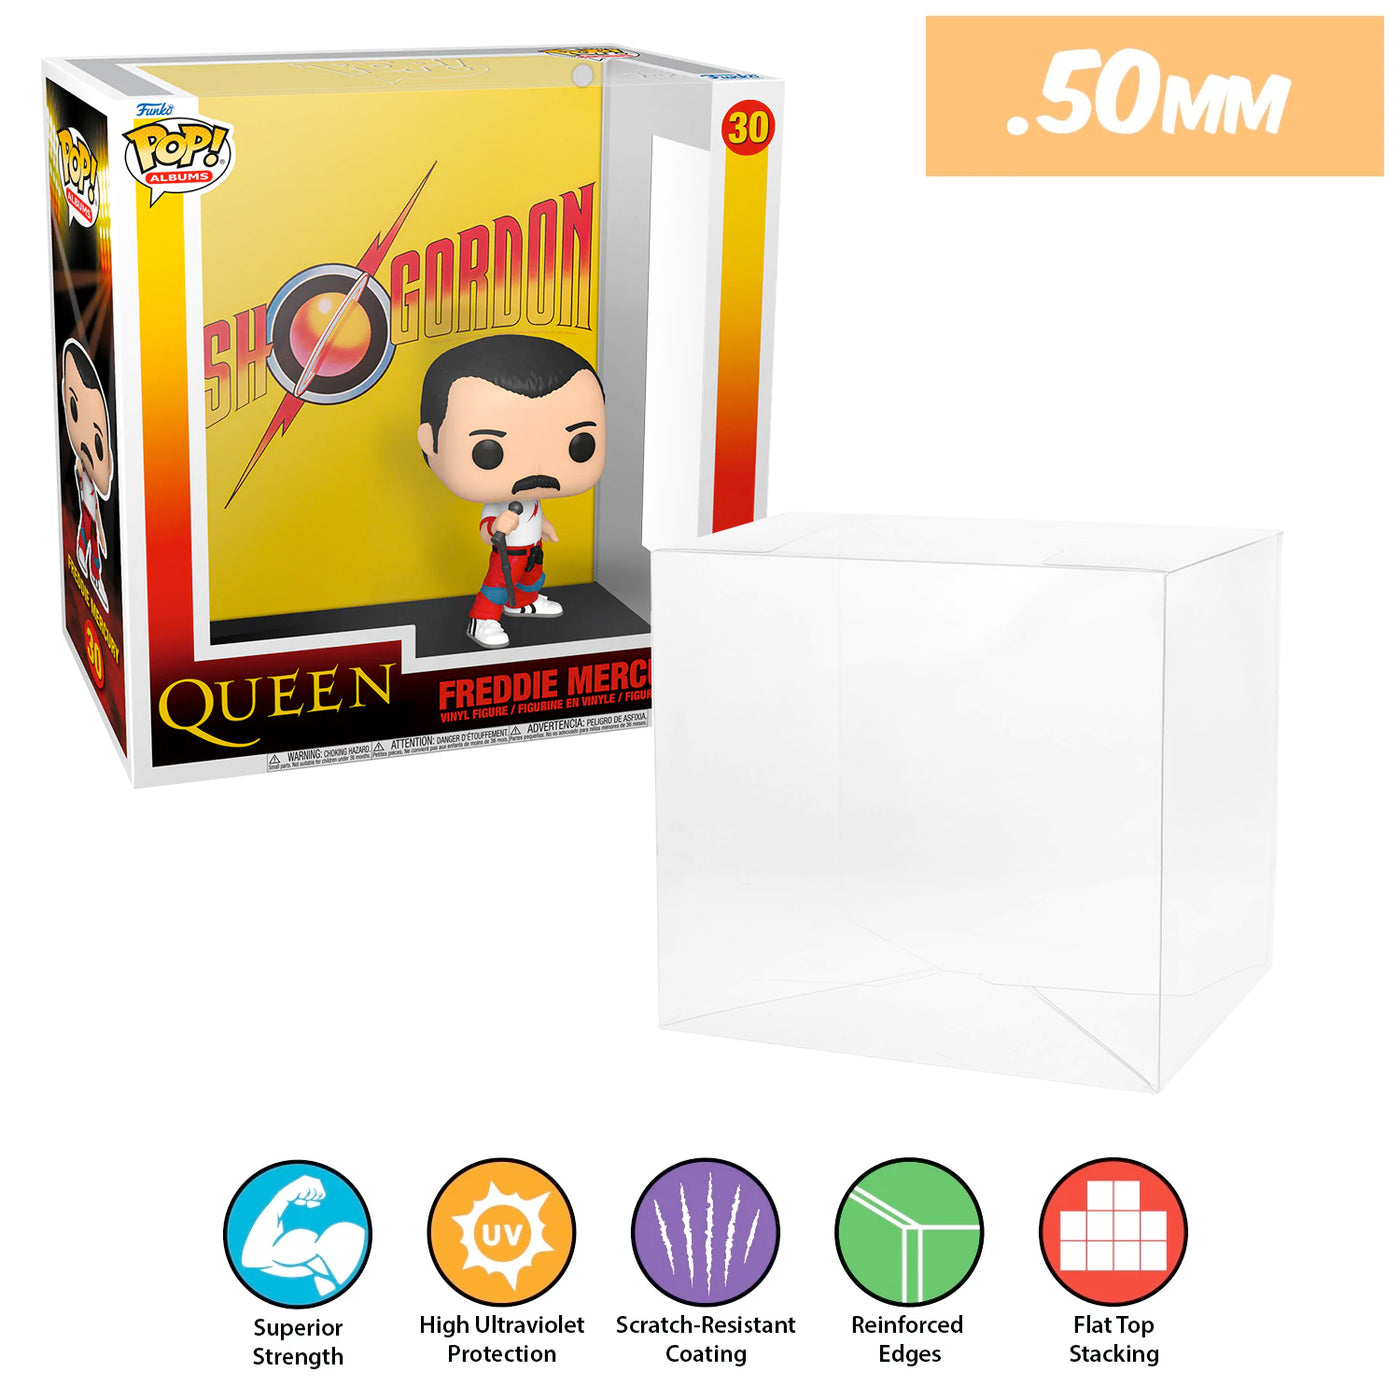 30 queen flash gordon pop albums best funko pop protectors thick strong uv scratch flat top stack vinyl display geek plastic shield vaulted eco armor fits collect protect display case kollector protector